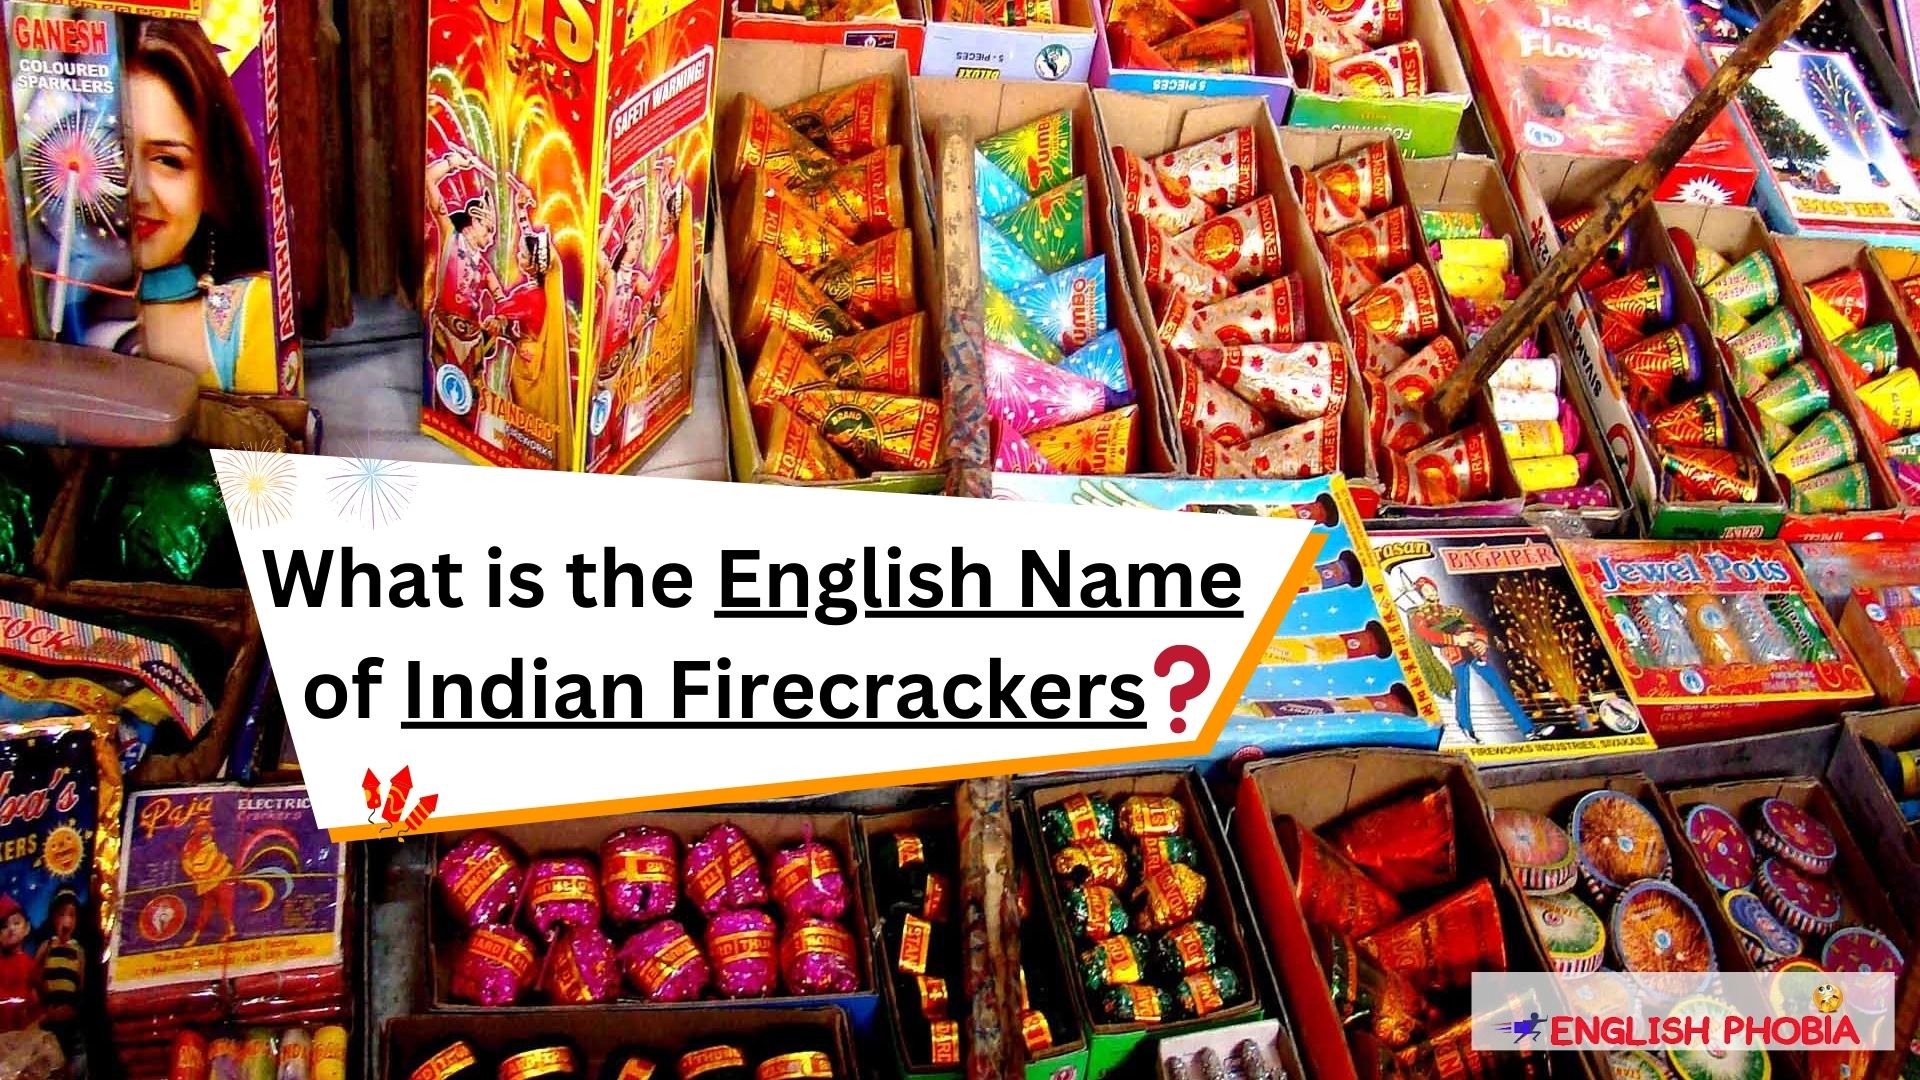 English name of Indian Firecrackers